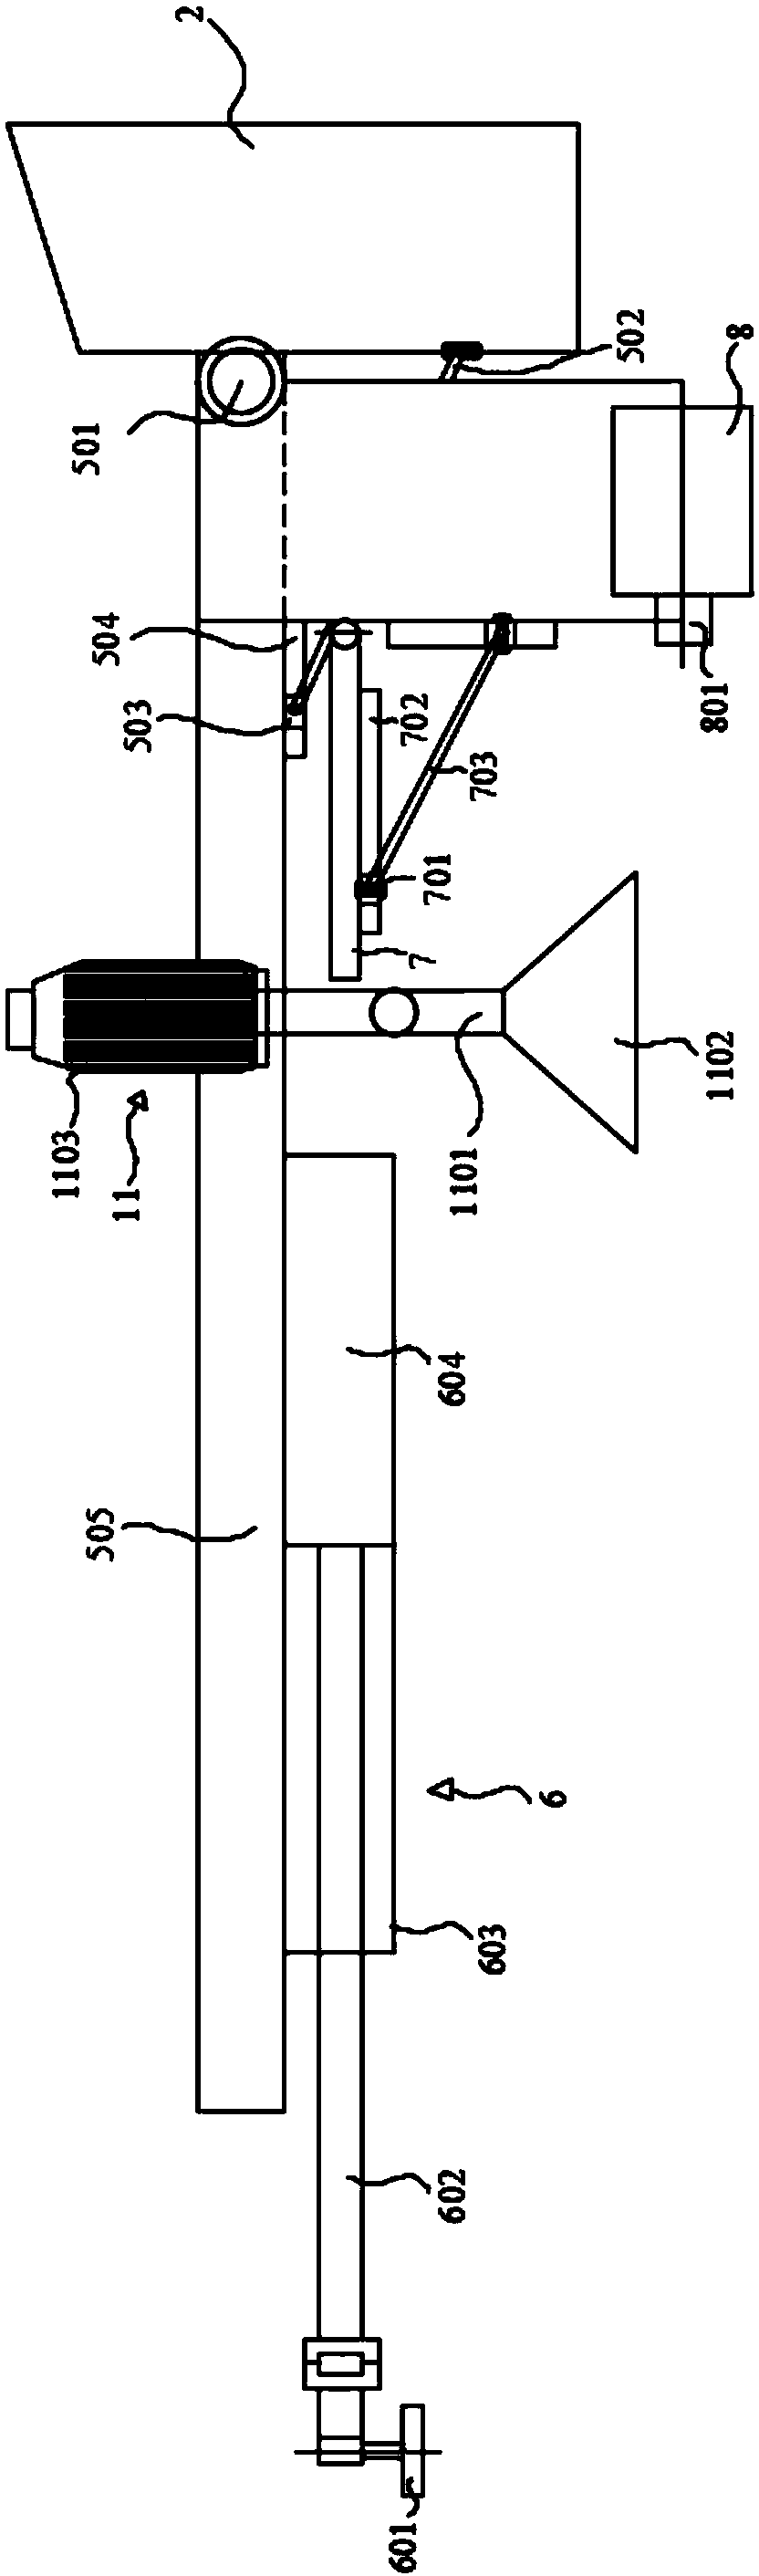 Automatic traveling detecting device suitable for air train track